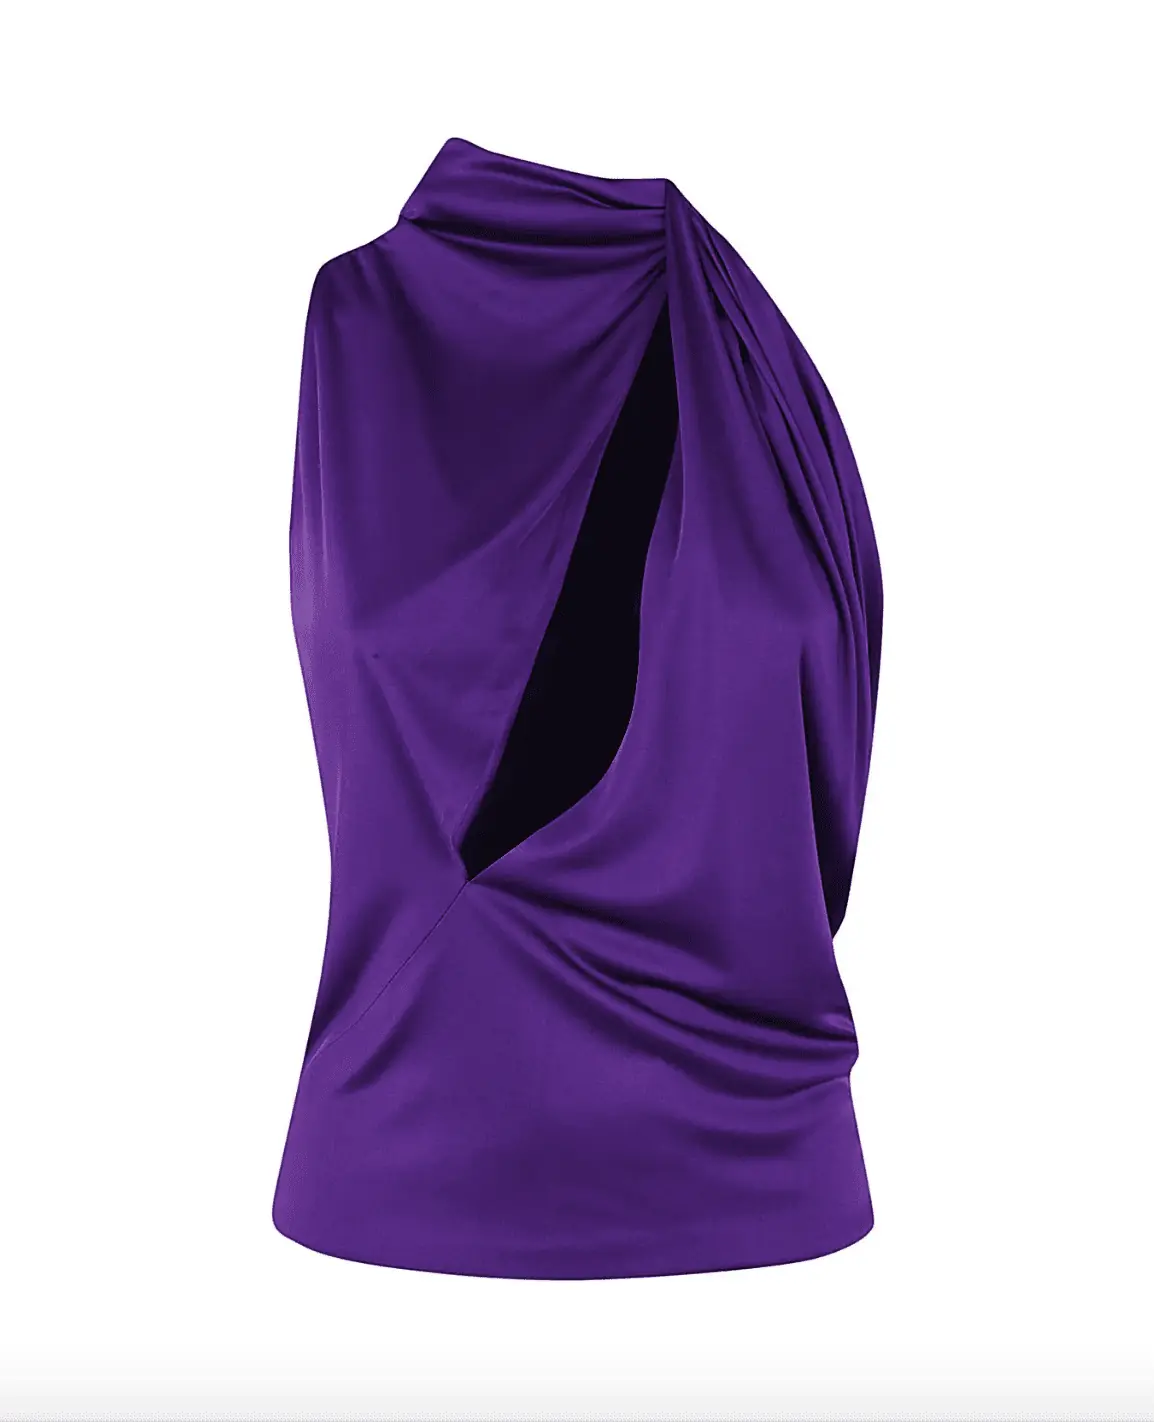 Sheree Whitfield's Purple Cutout Confessional Top